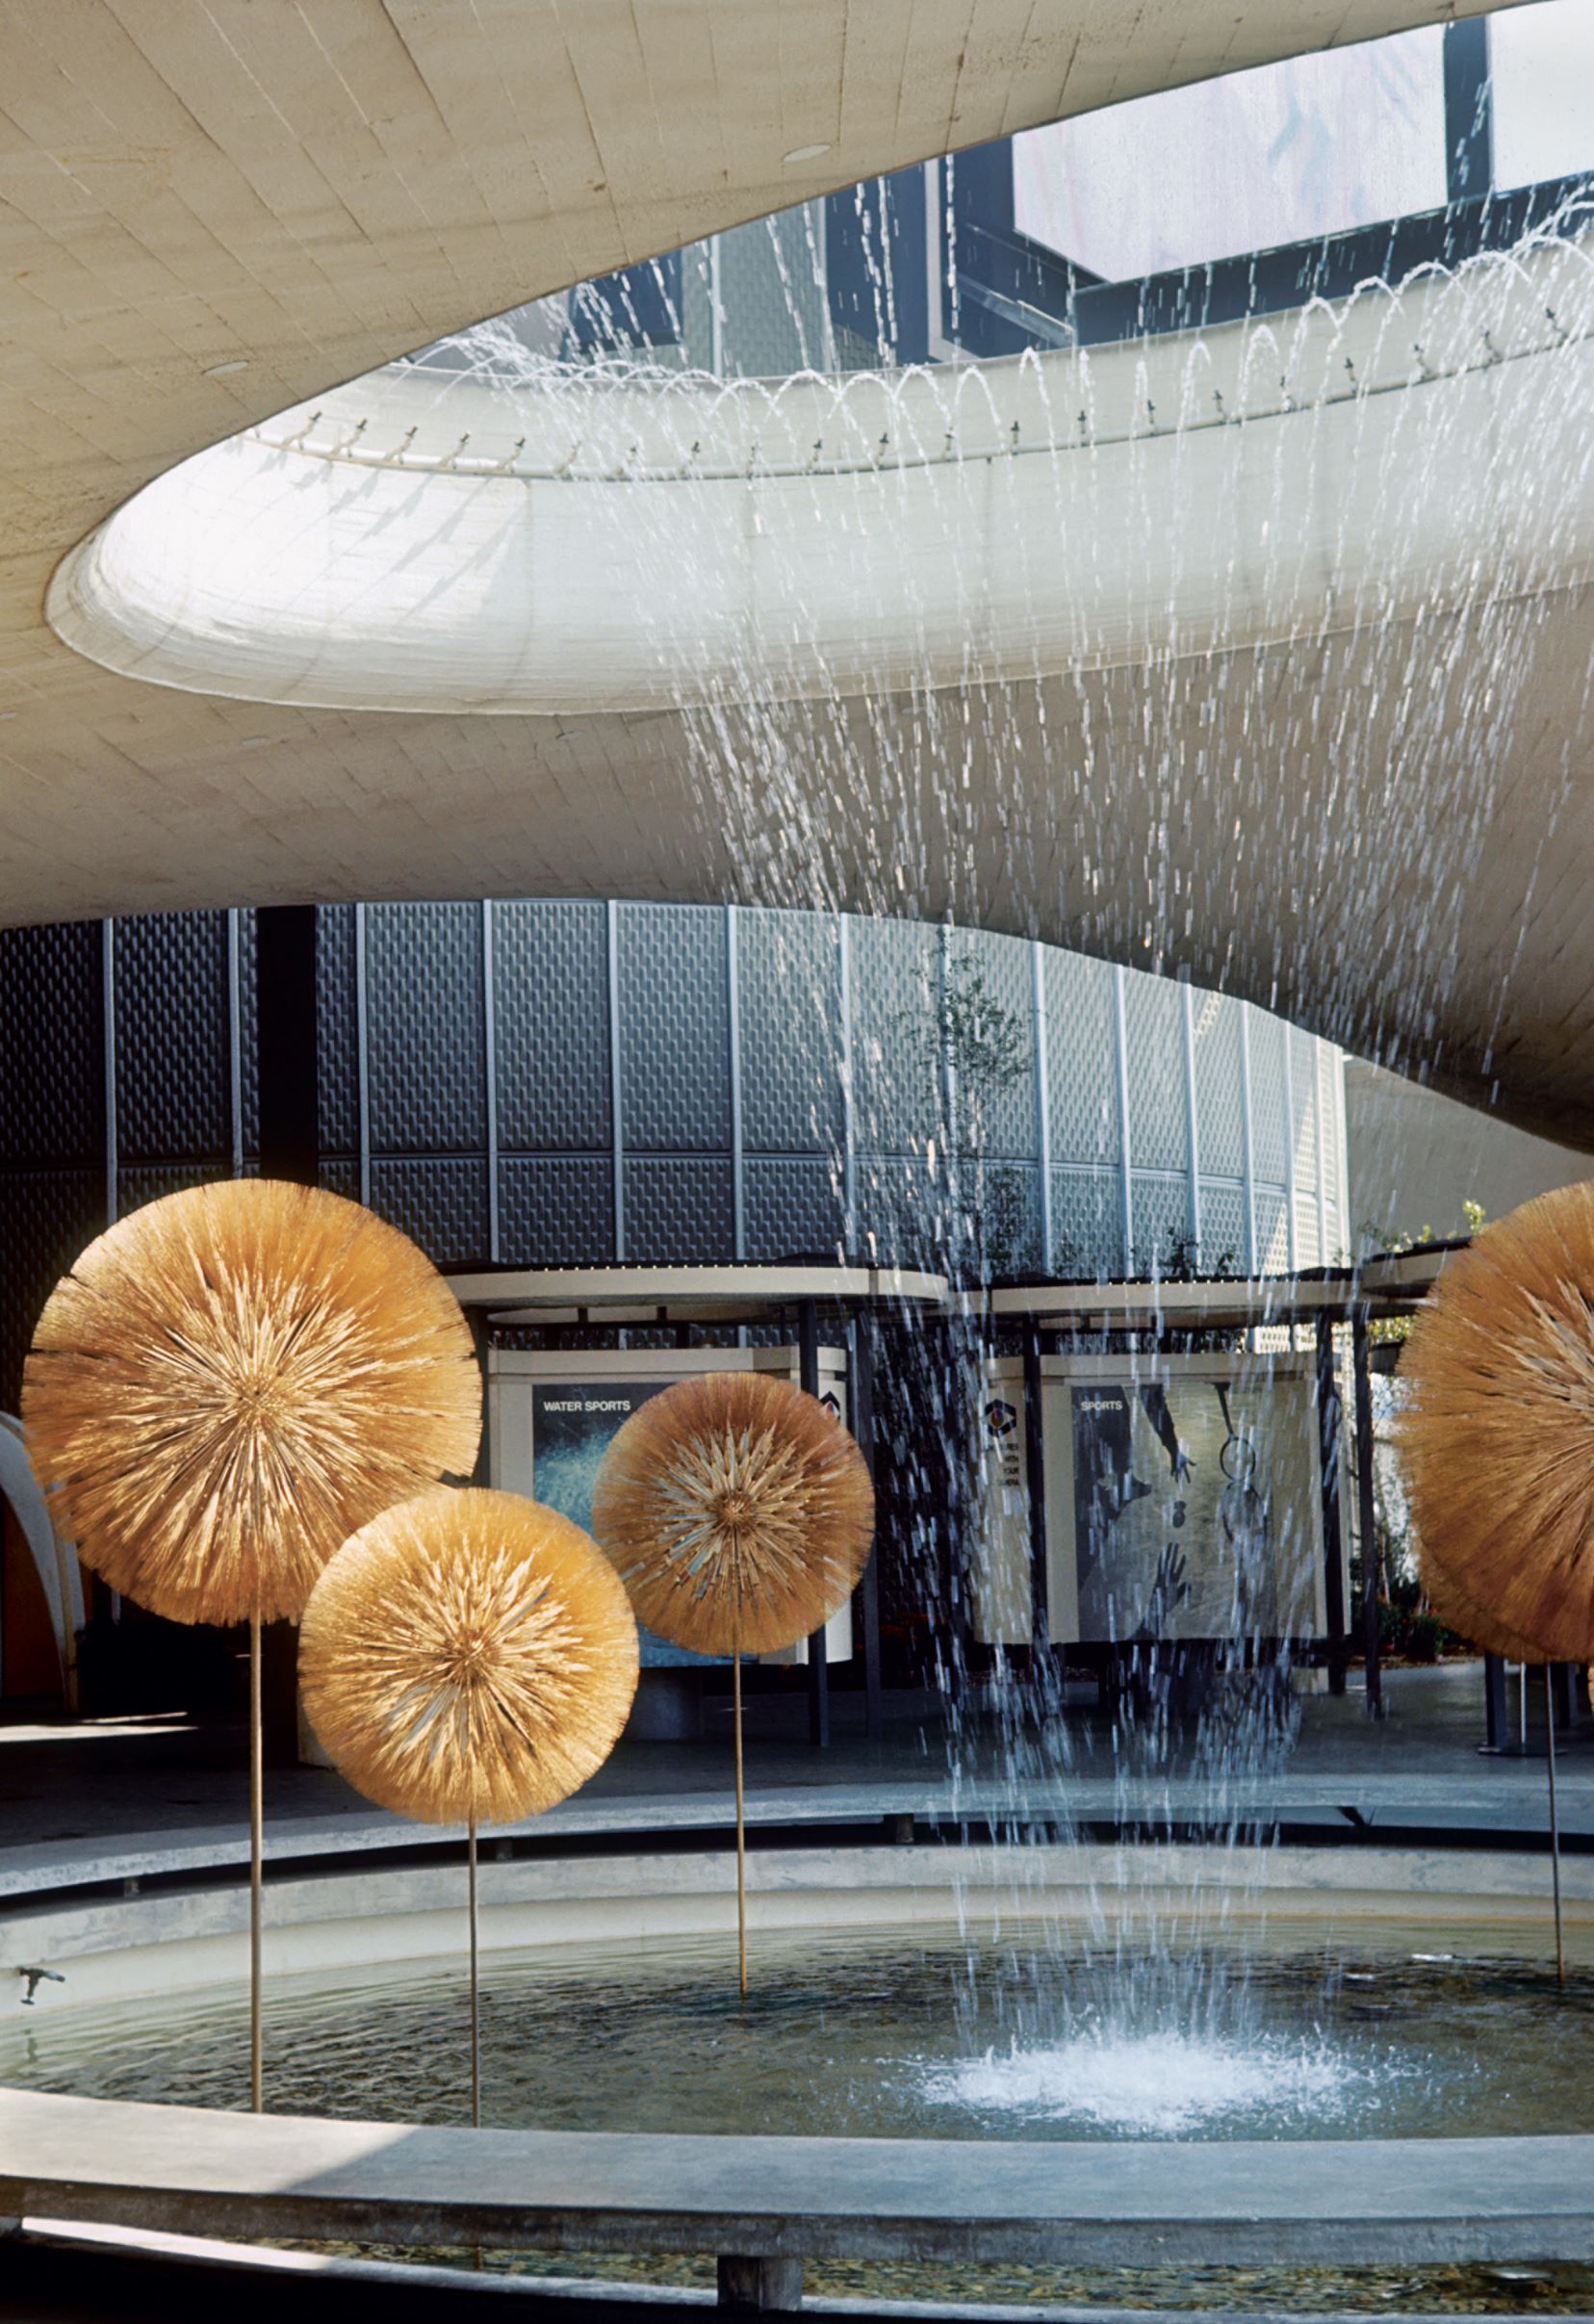 Six dandelion sculptures by Harry Bertoia at the basin and fountain, Eastman Kodak Pavilion, New York World’s Fair, 1964. As featured in Bertoia: The Metal Worker